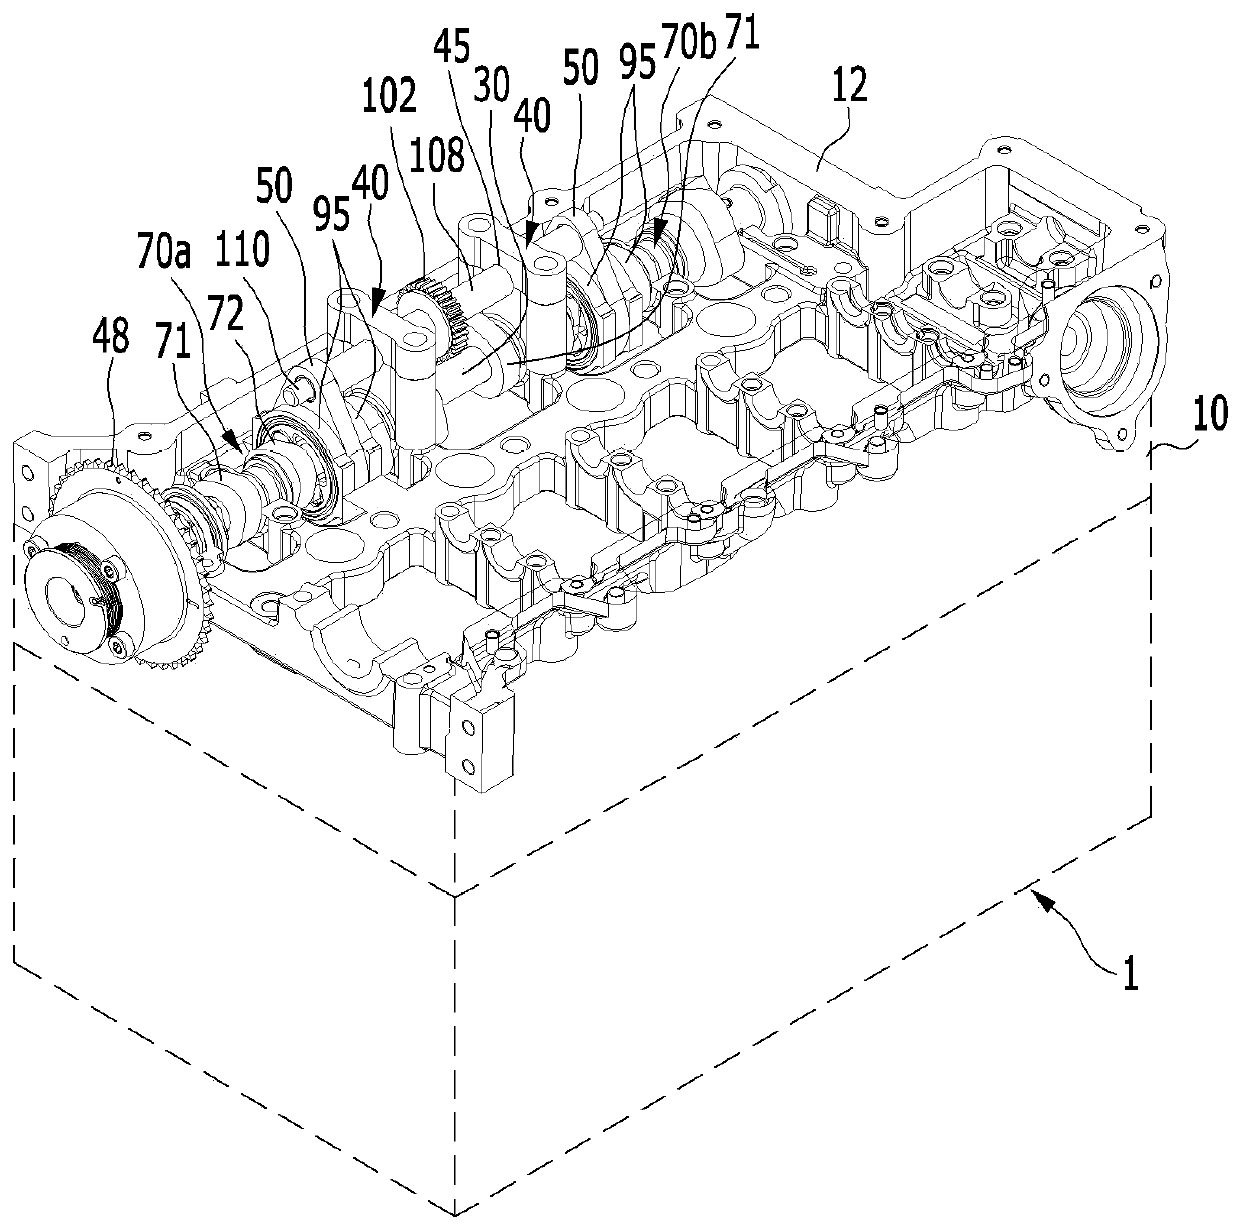 Continuously variable valve duration device and associated engine